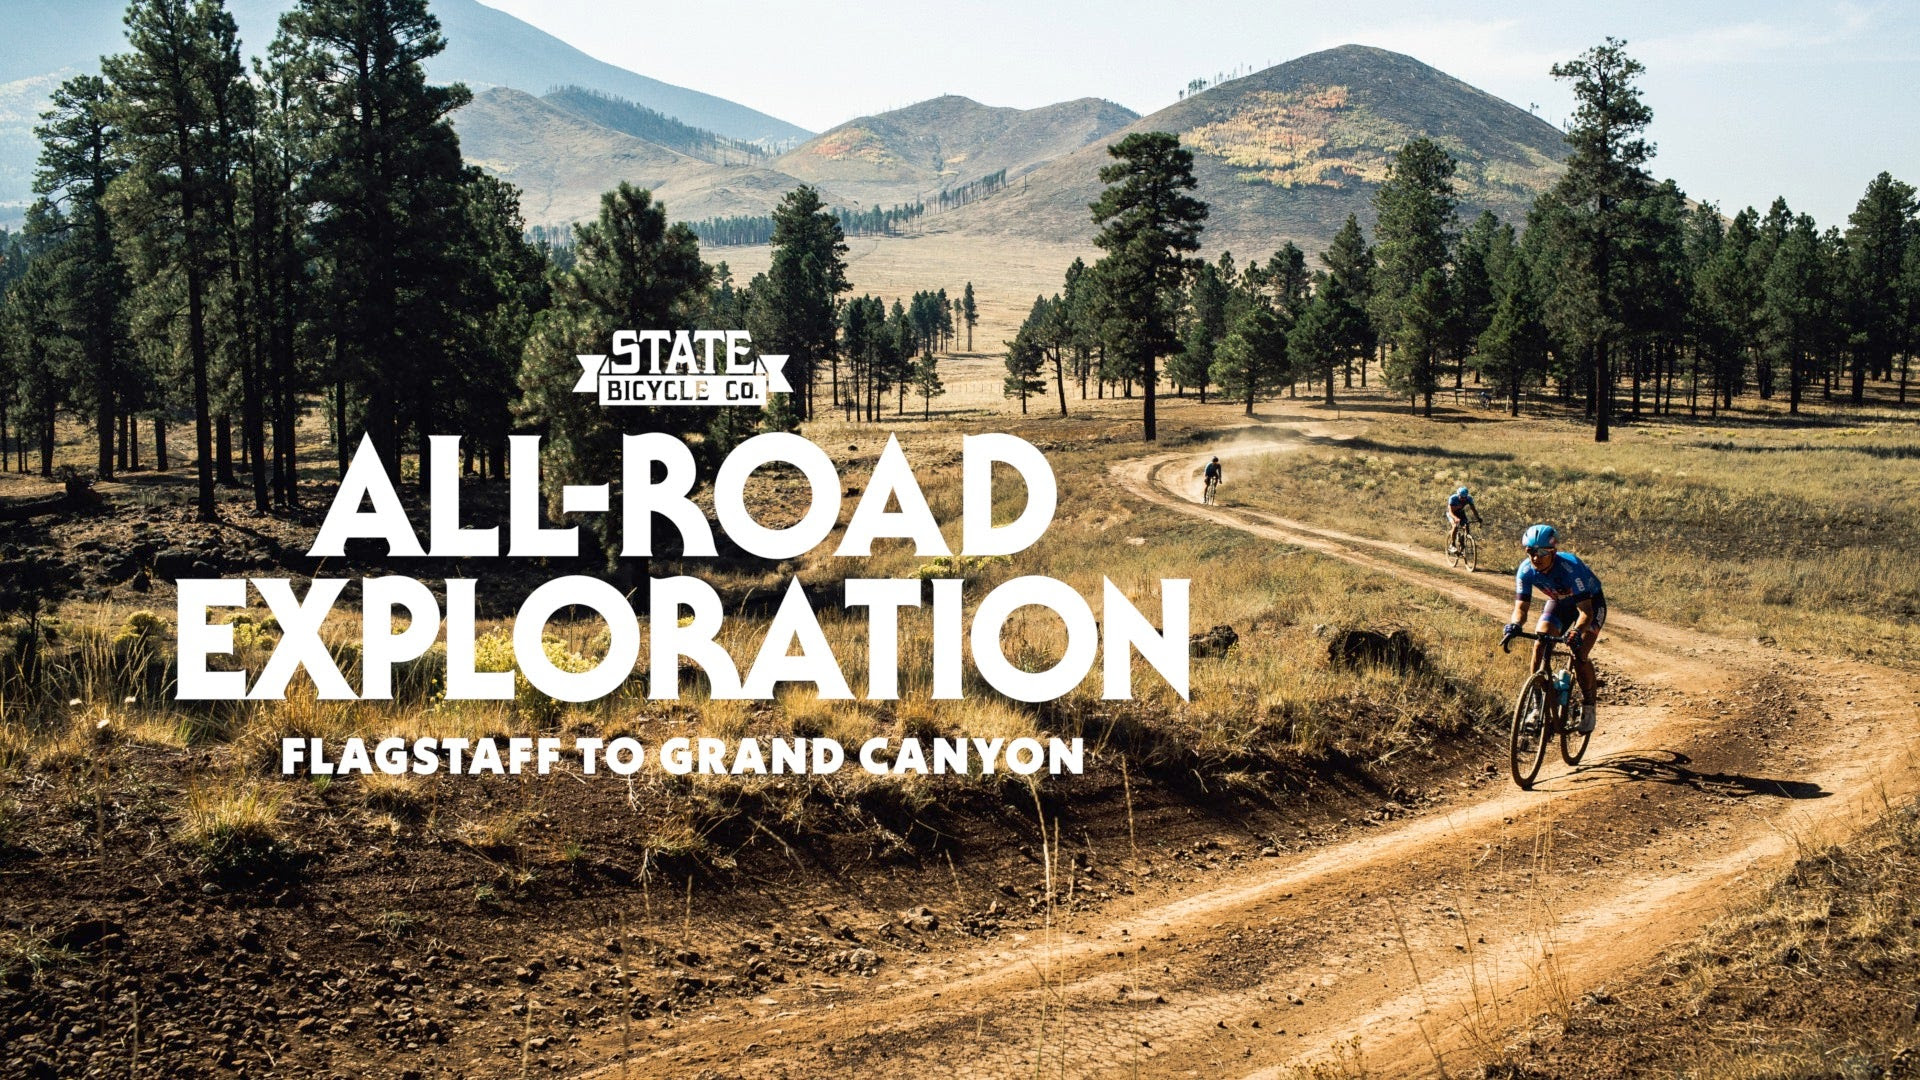 The driving distance from flagstaff, arizona to grand canyon is: All Road Exploration Flagstaff To Grand Canyon On The 6061 Black Lab State Bicycle Co